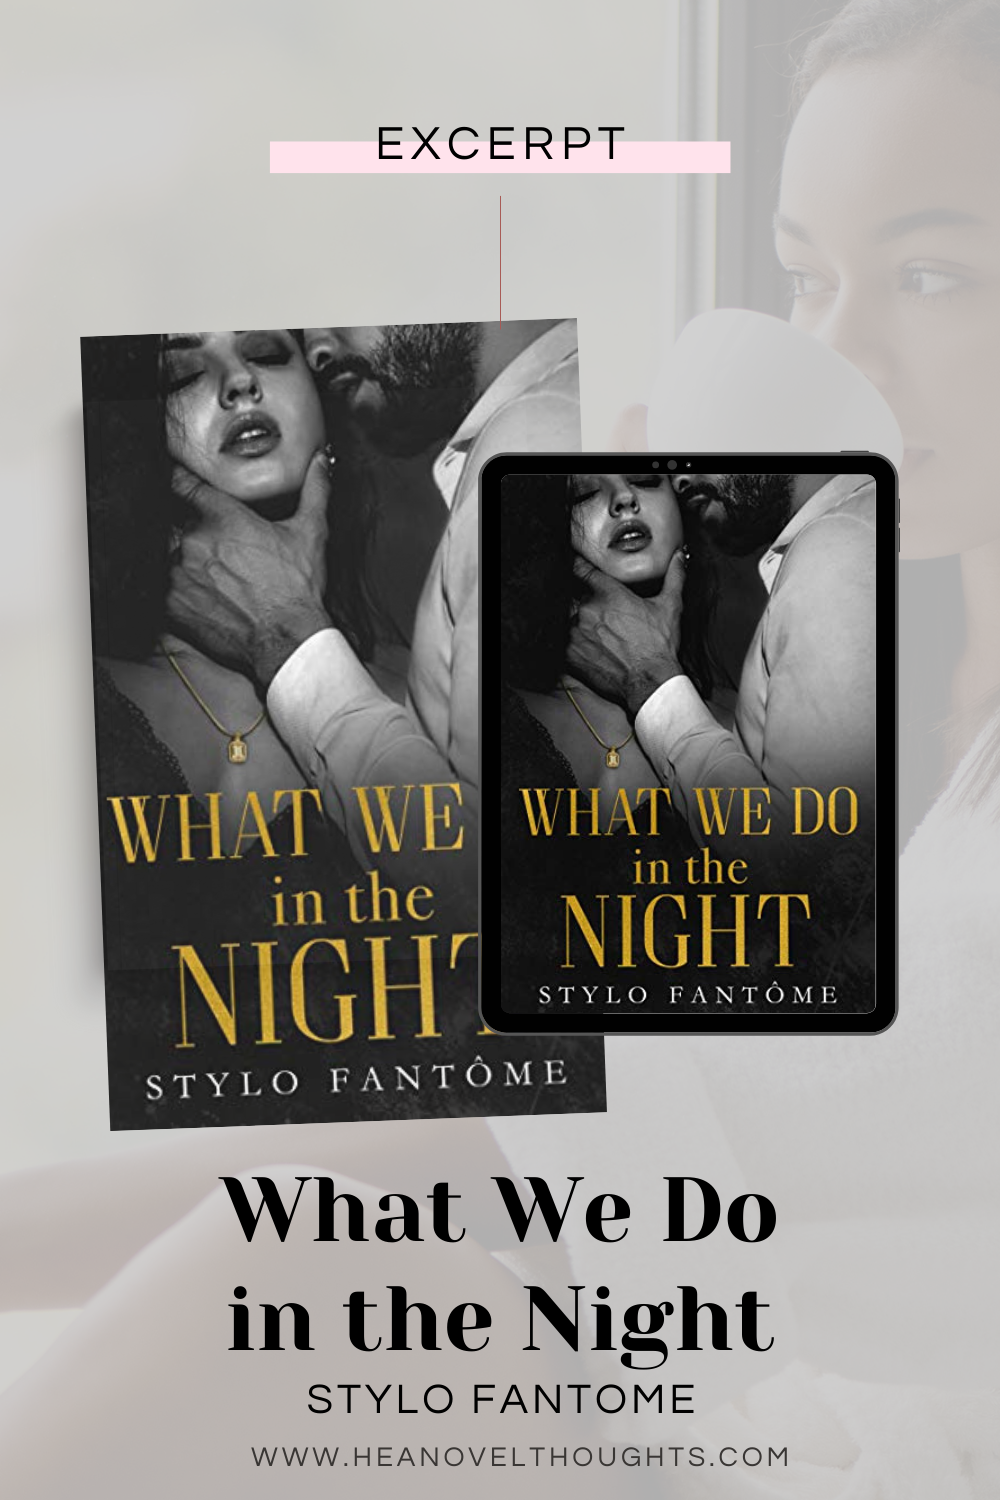 Exclusive Excerpt of What We Do in the Night by Stylo Fantome